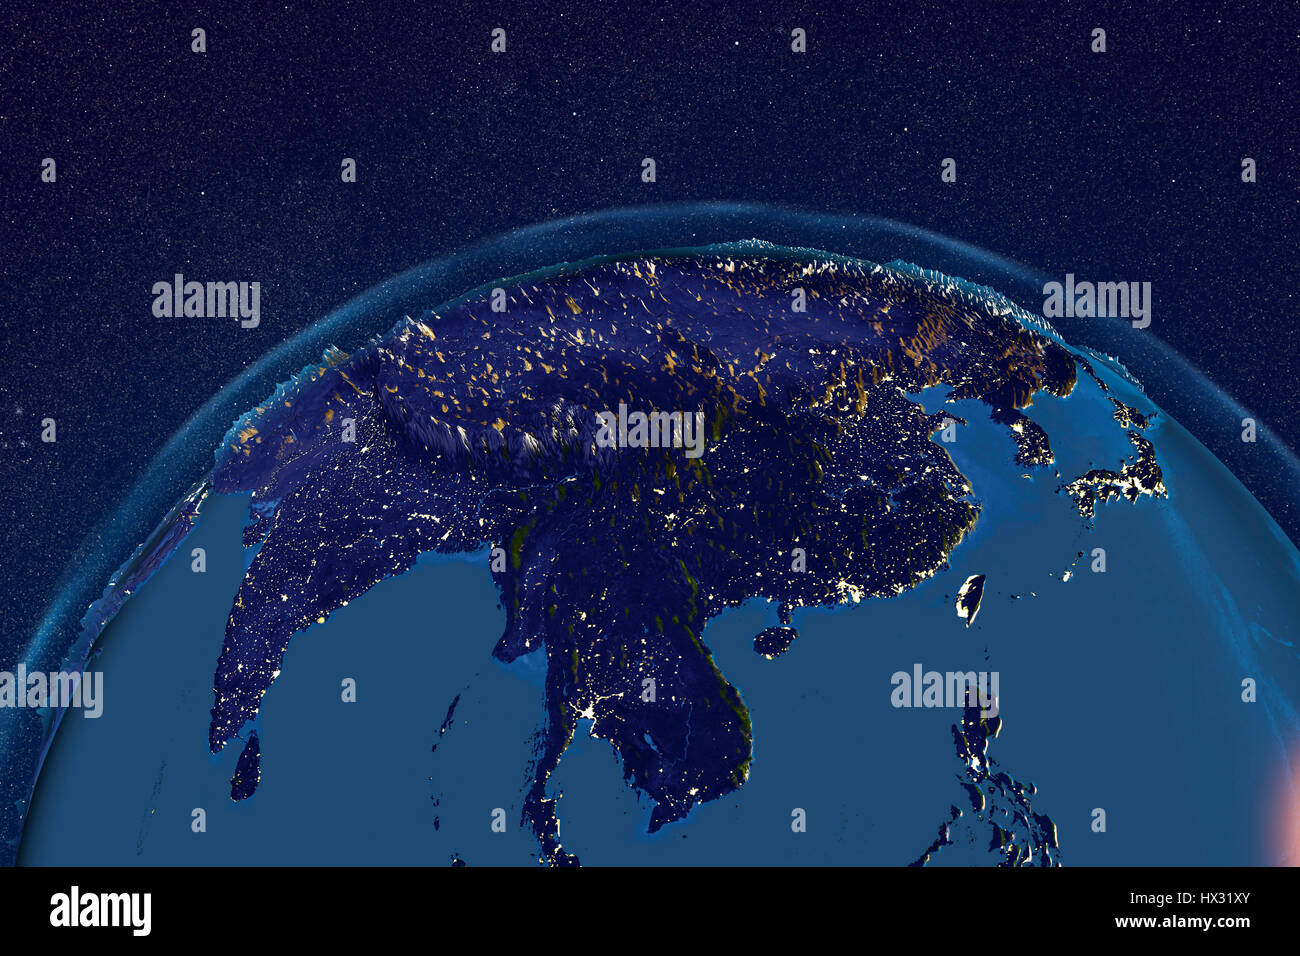 Earth from space in night. Computer illustration showing the Earth as viewed from space, centred over Asia. Stock Photo